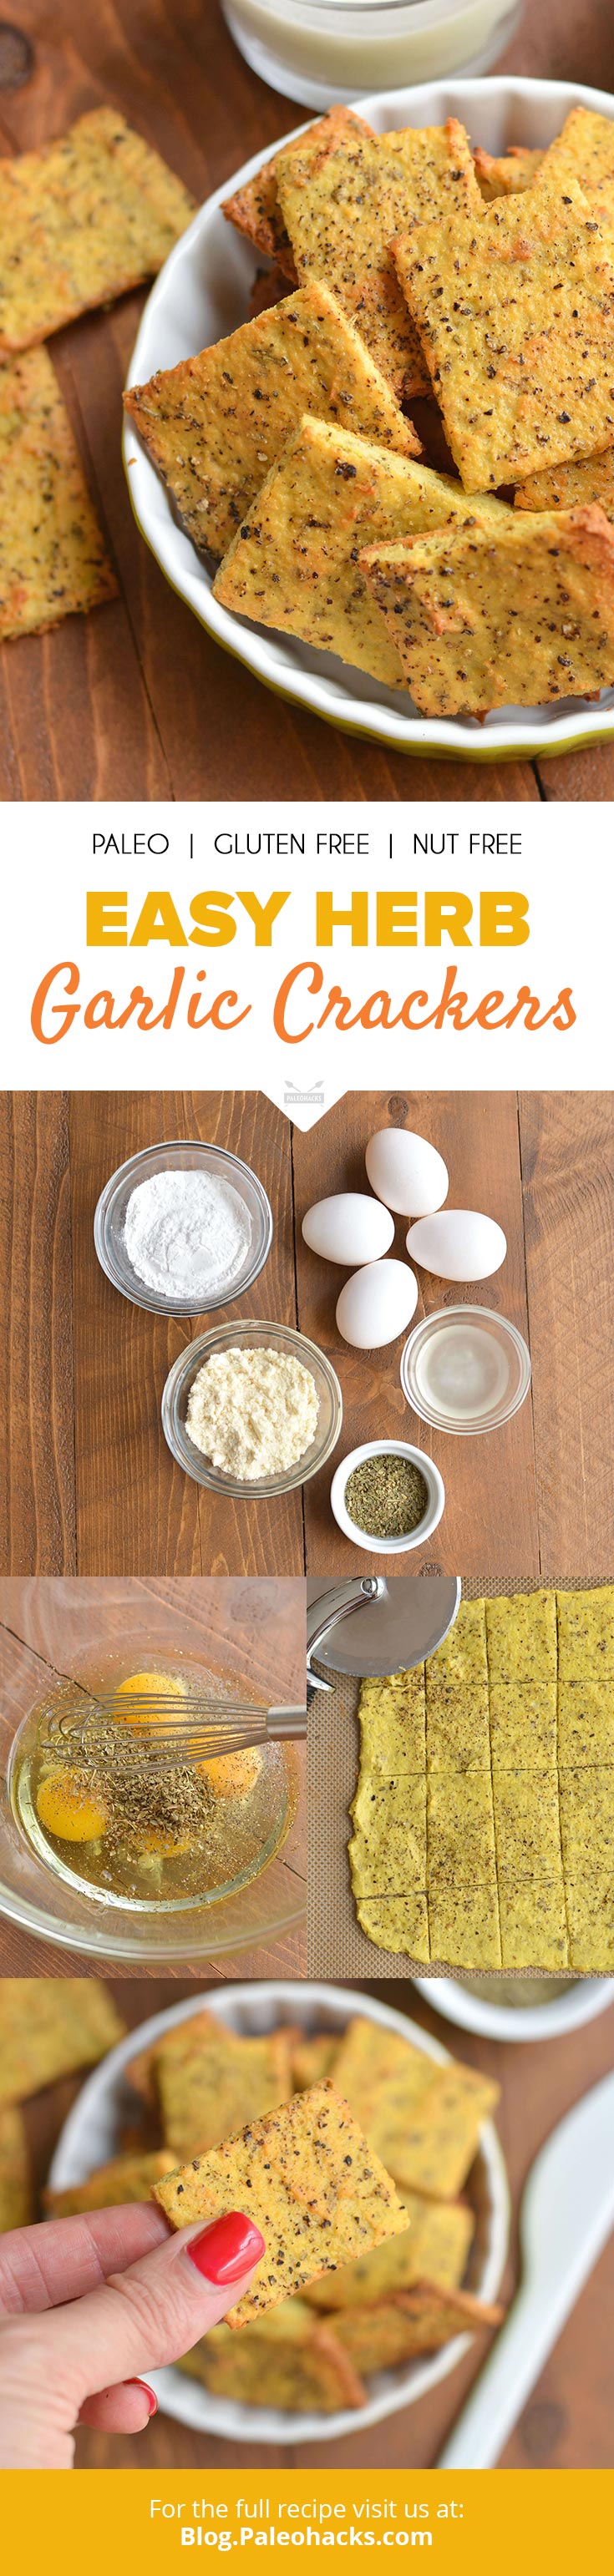 These easy, grain-free herb garlic crackers bake to perfection in just 30 minutes. Free of gluten and nuts, they're way better than Wheat Thins!